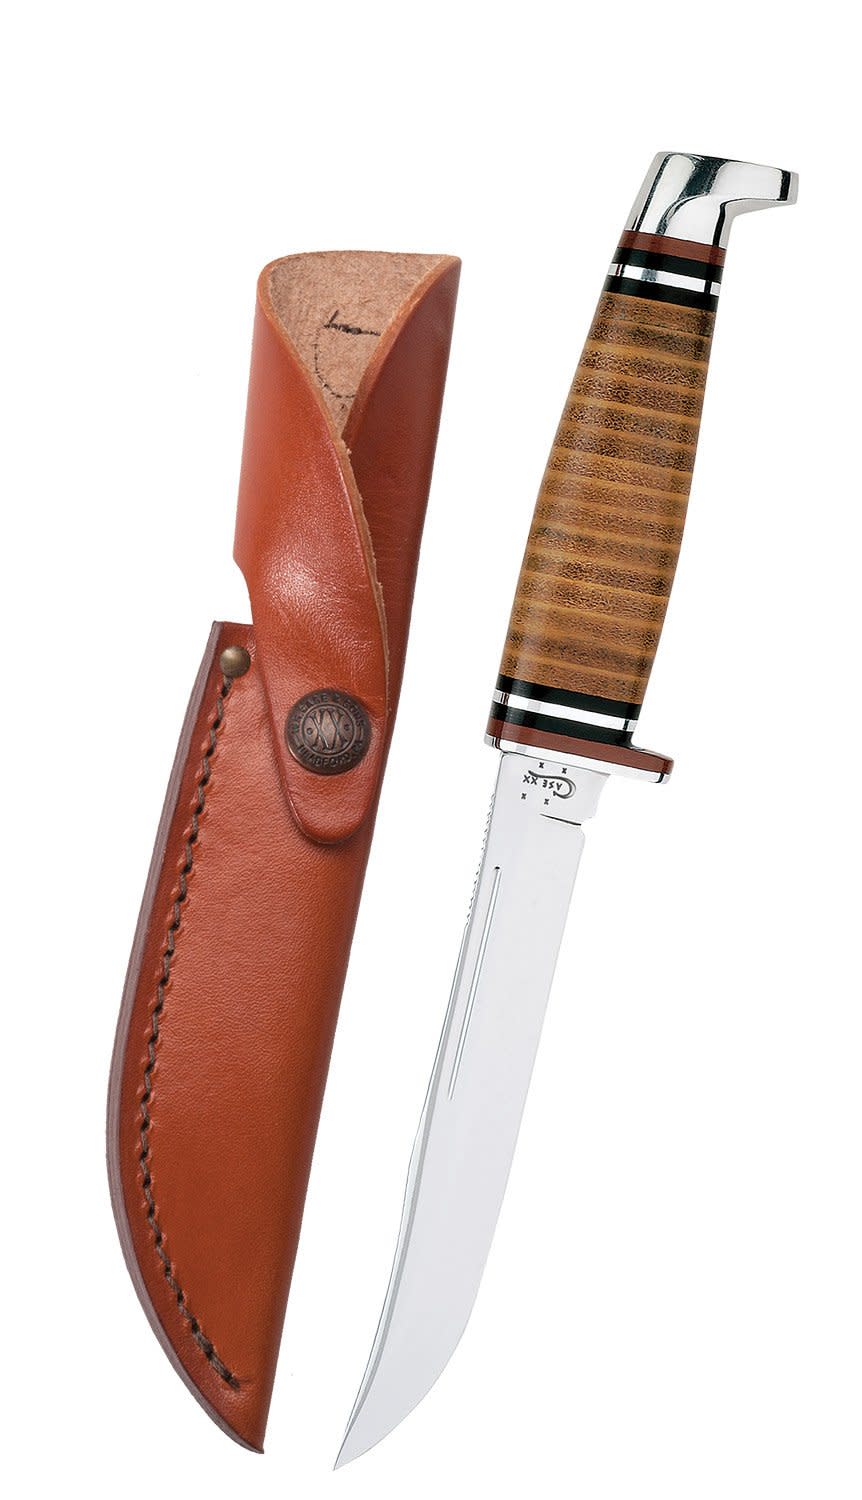 Leather 5" Utility Hunter Knife with Leather Sheath